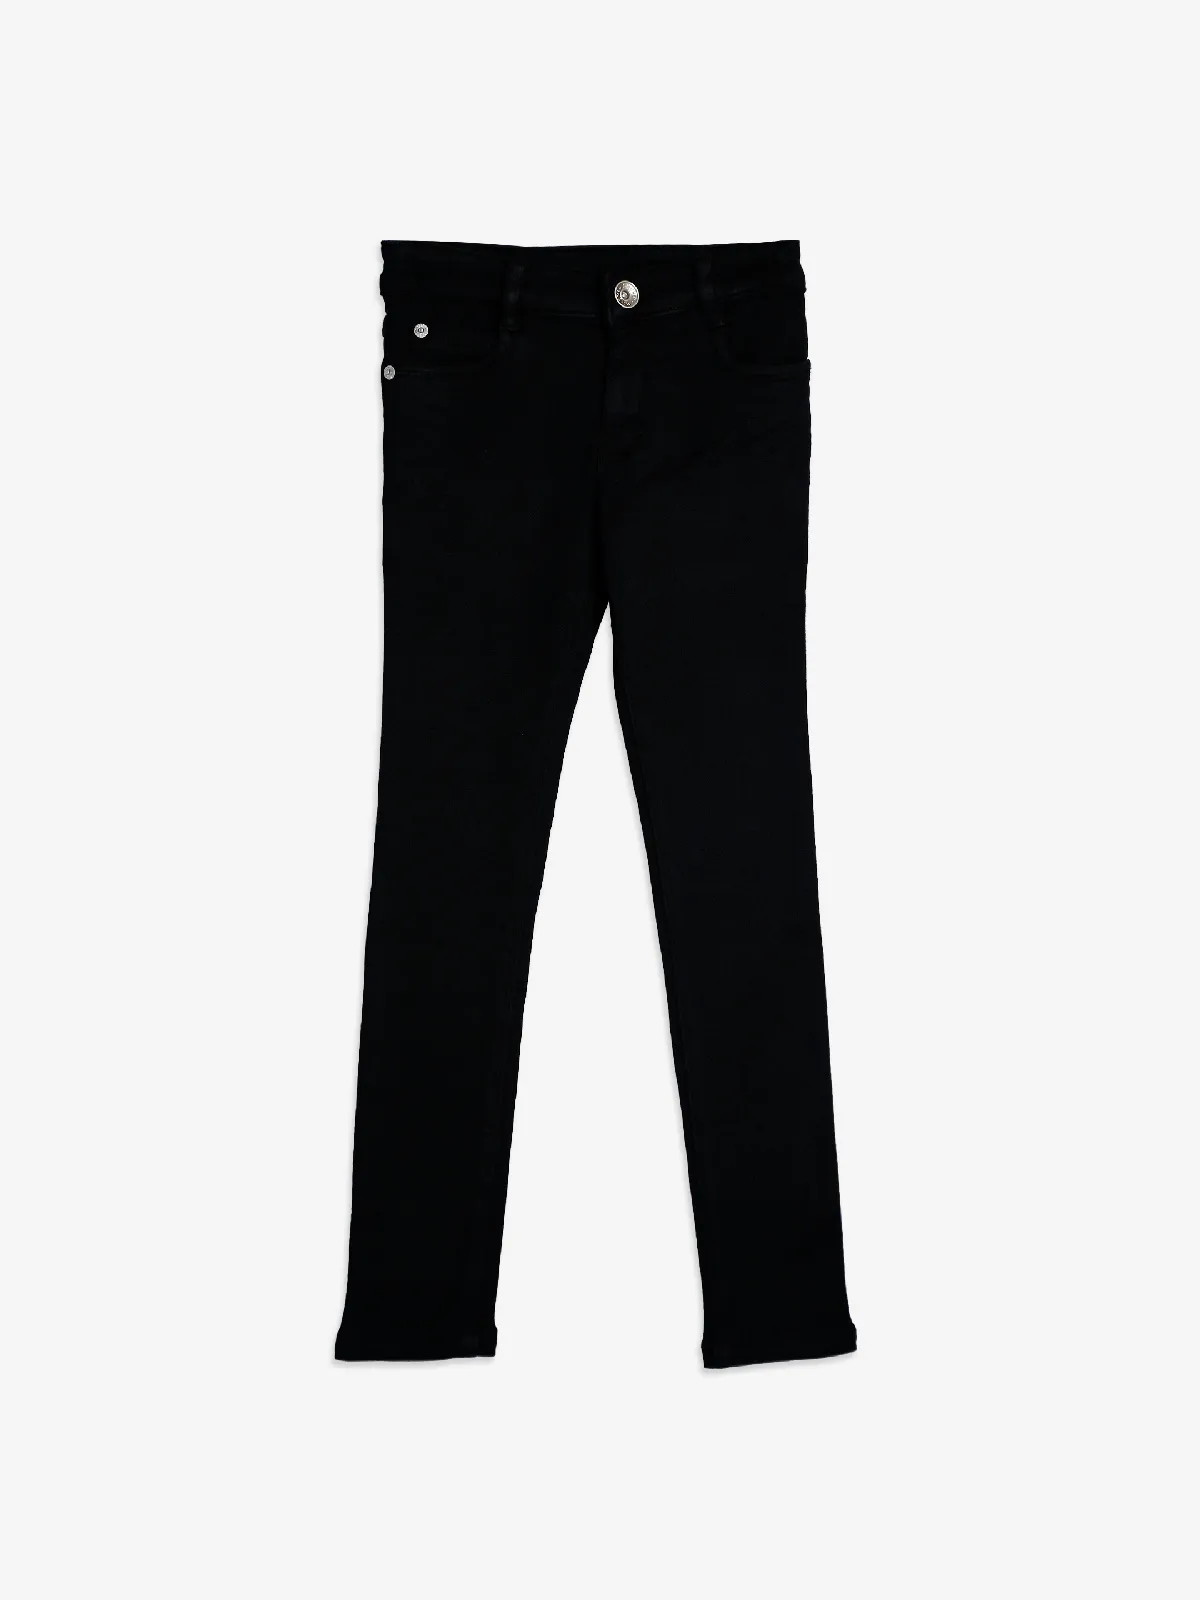 Trendy solid black jeans